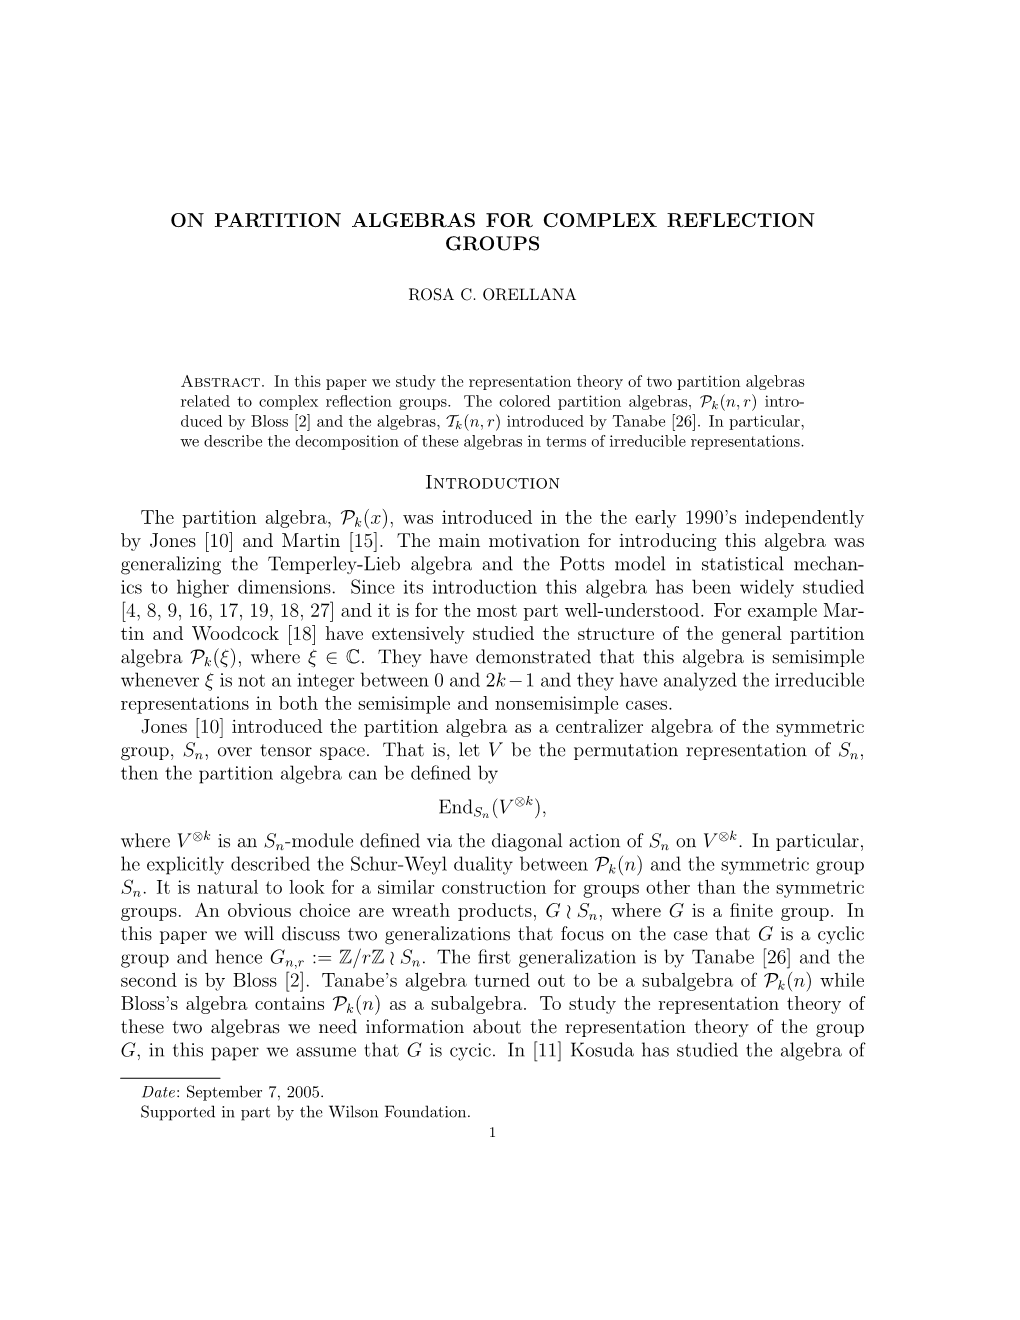 On the Partition Algebras of Complex Reflection Groups